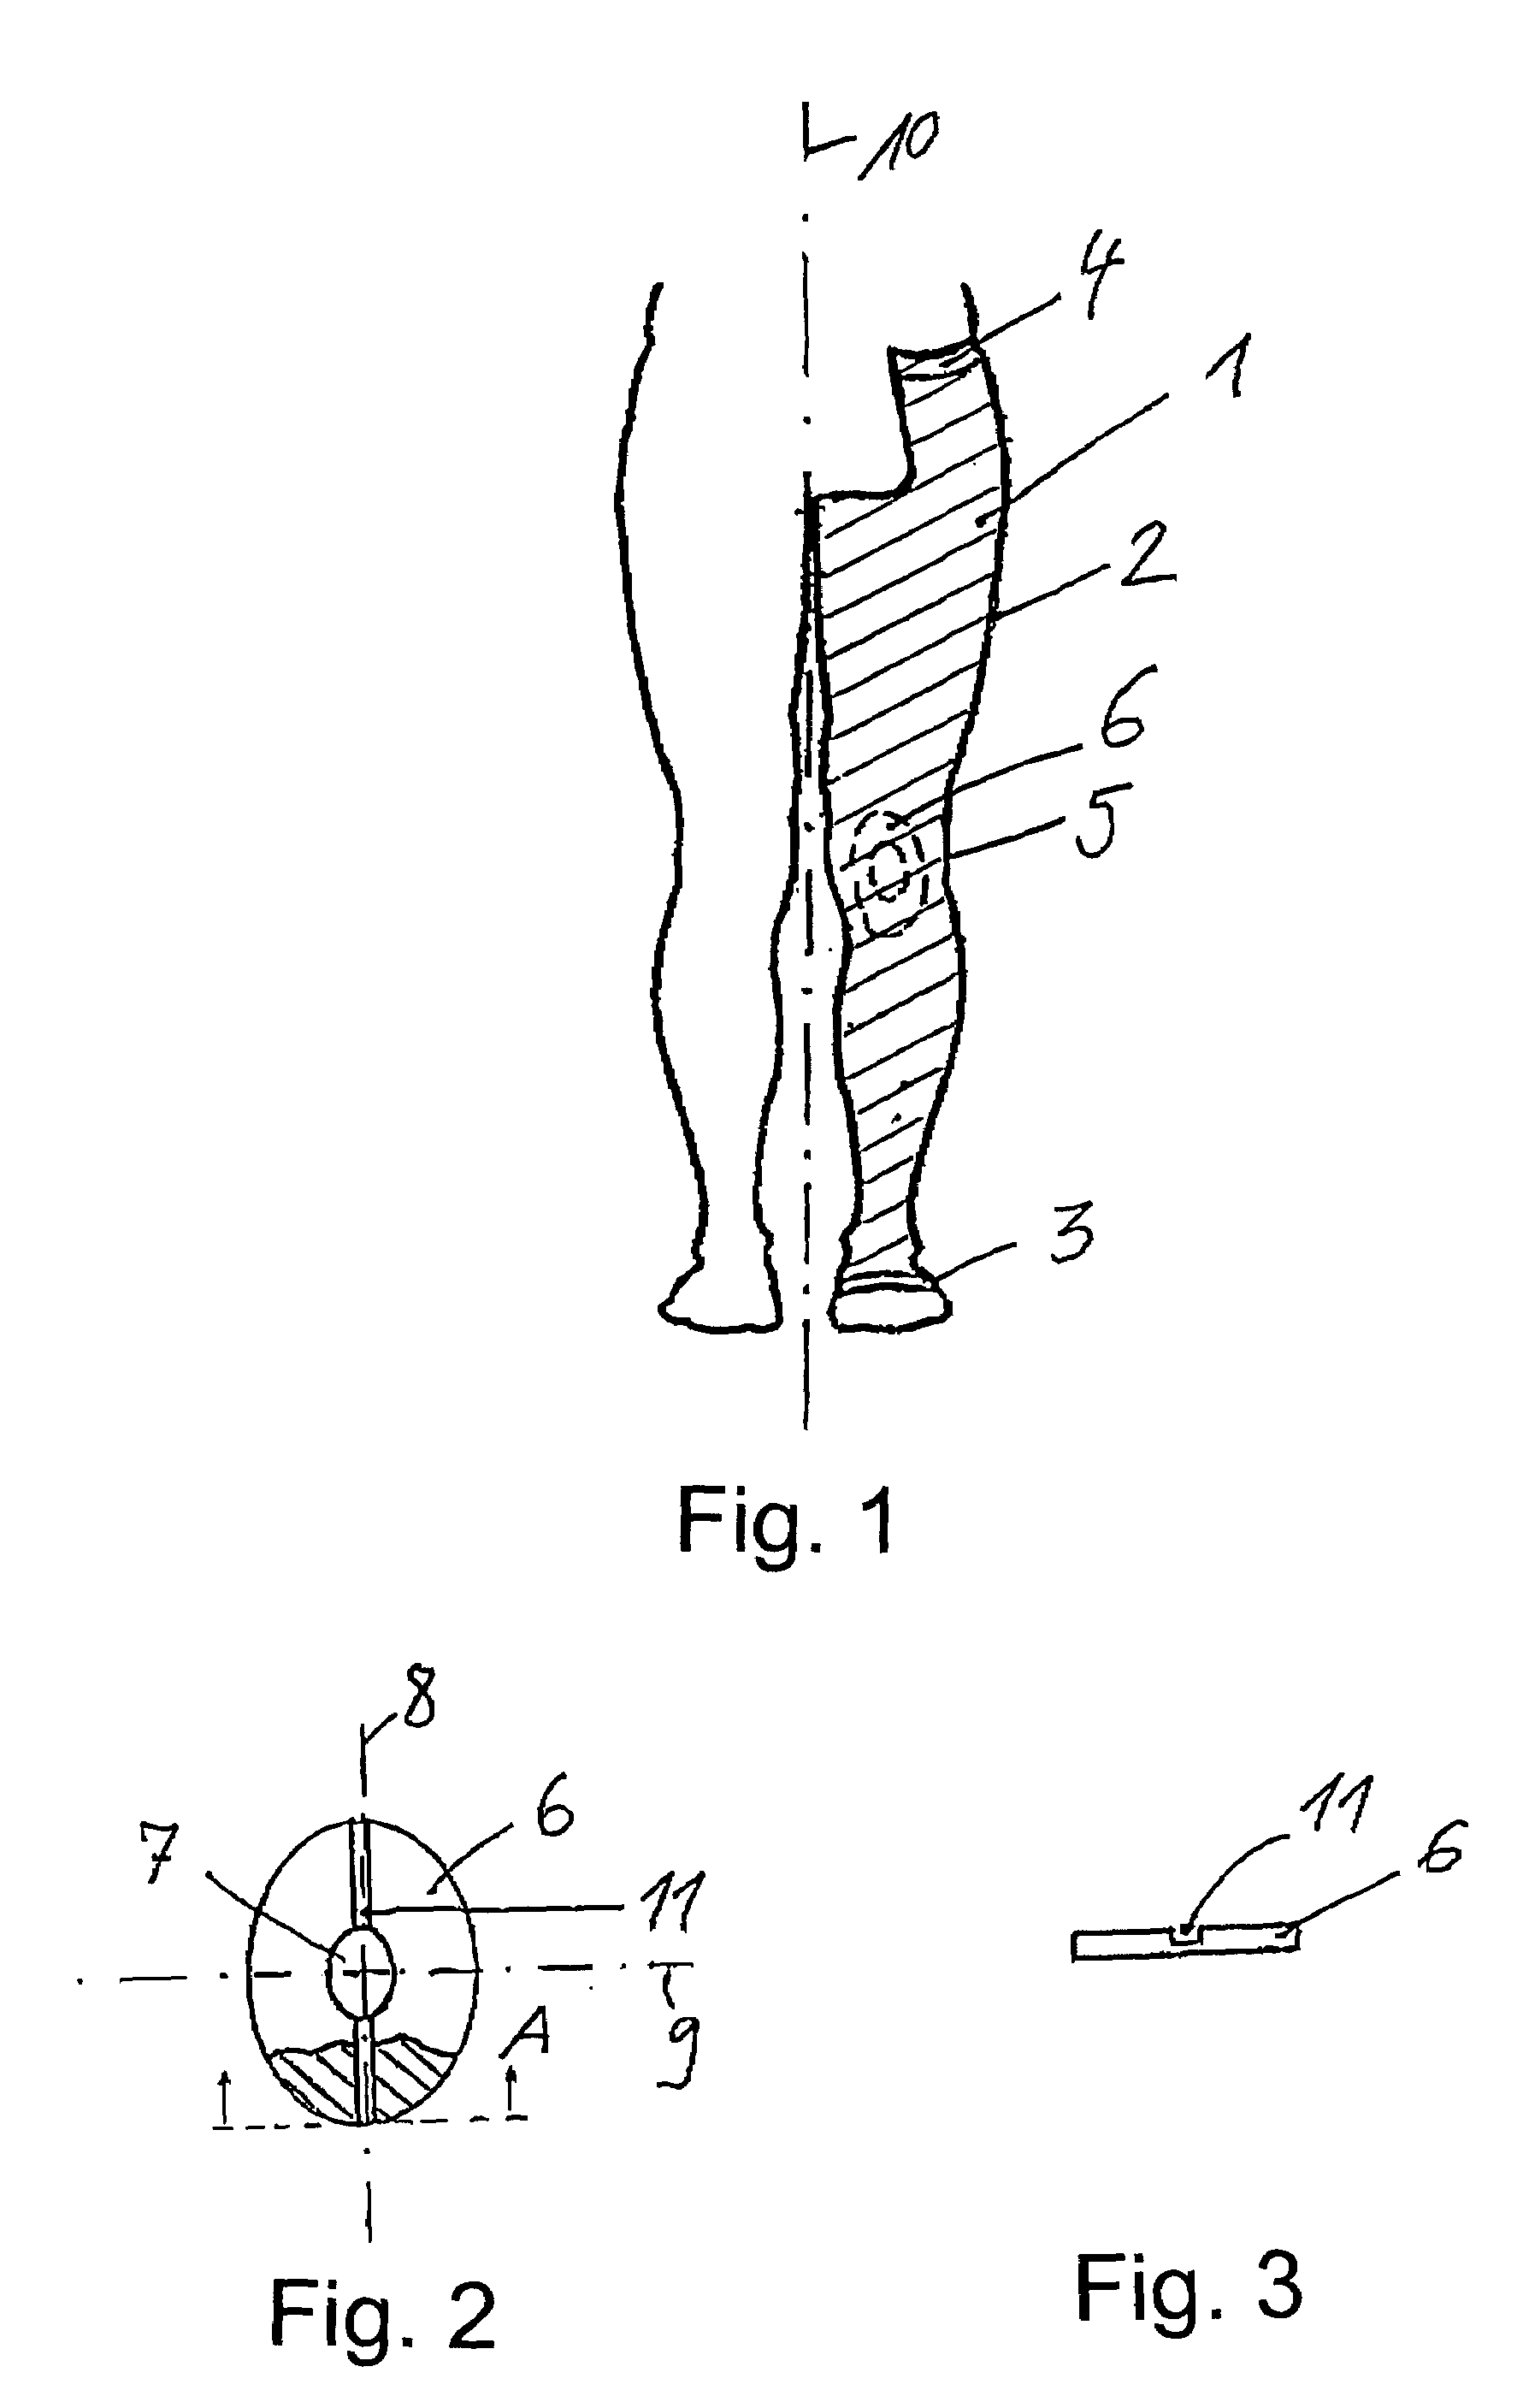 Compression support stocking with a compression support body